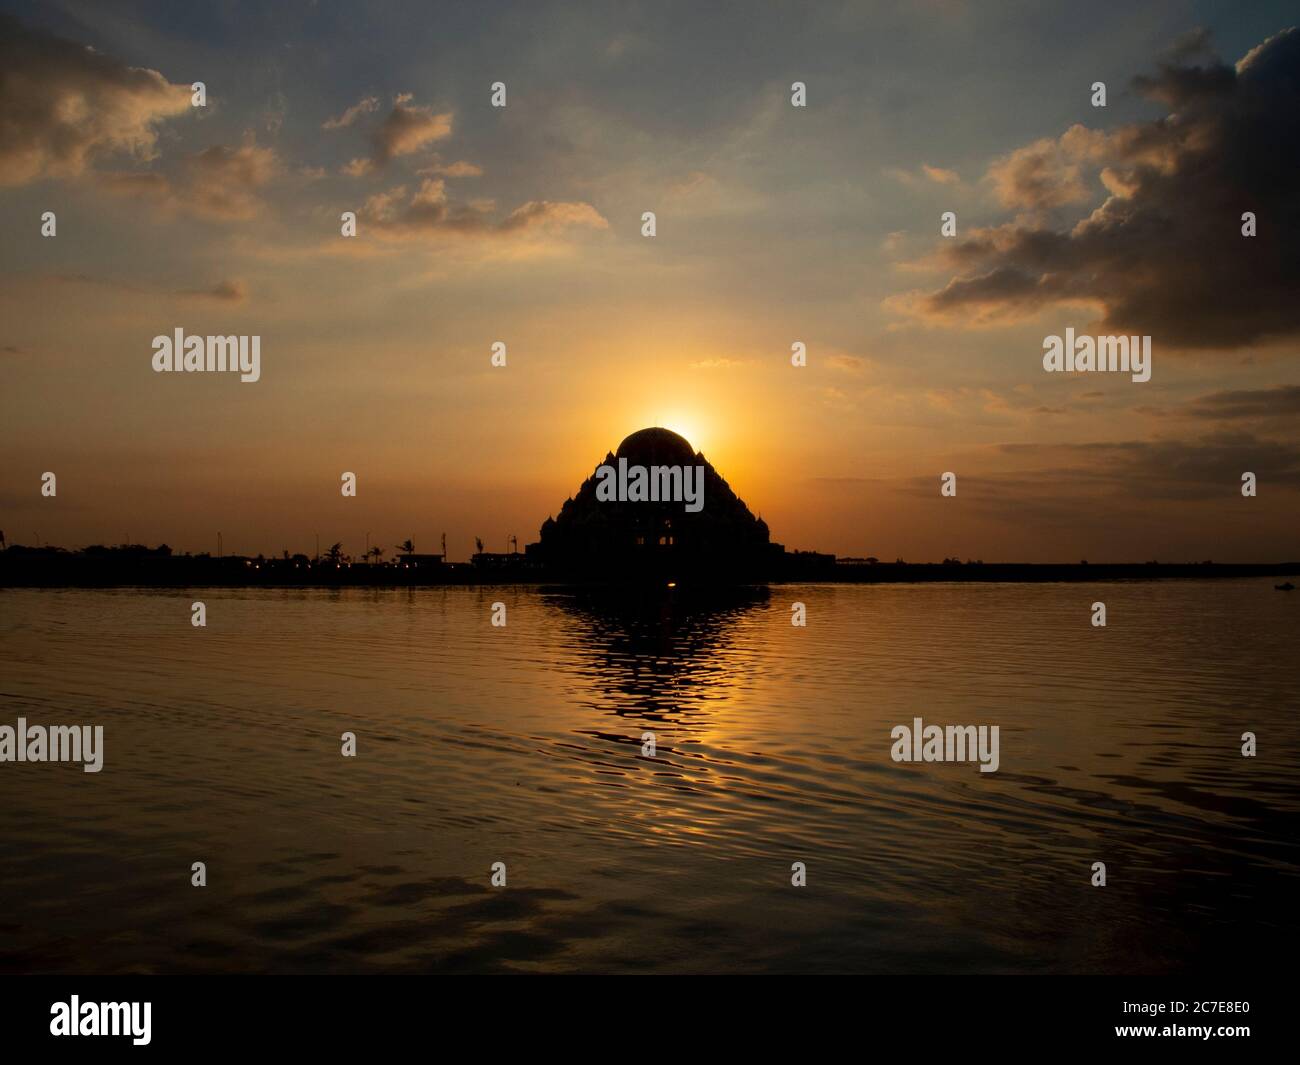 Amirul Mukminin Mosque during sunset. The mosque of 99 domes in Makassar, Indonesia. 99 Al Makazzary Mosque. Stock Photo